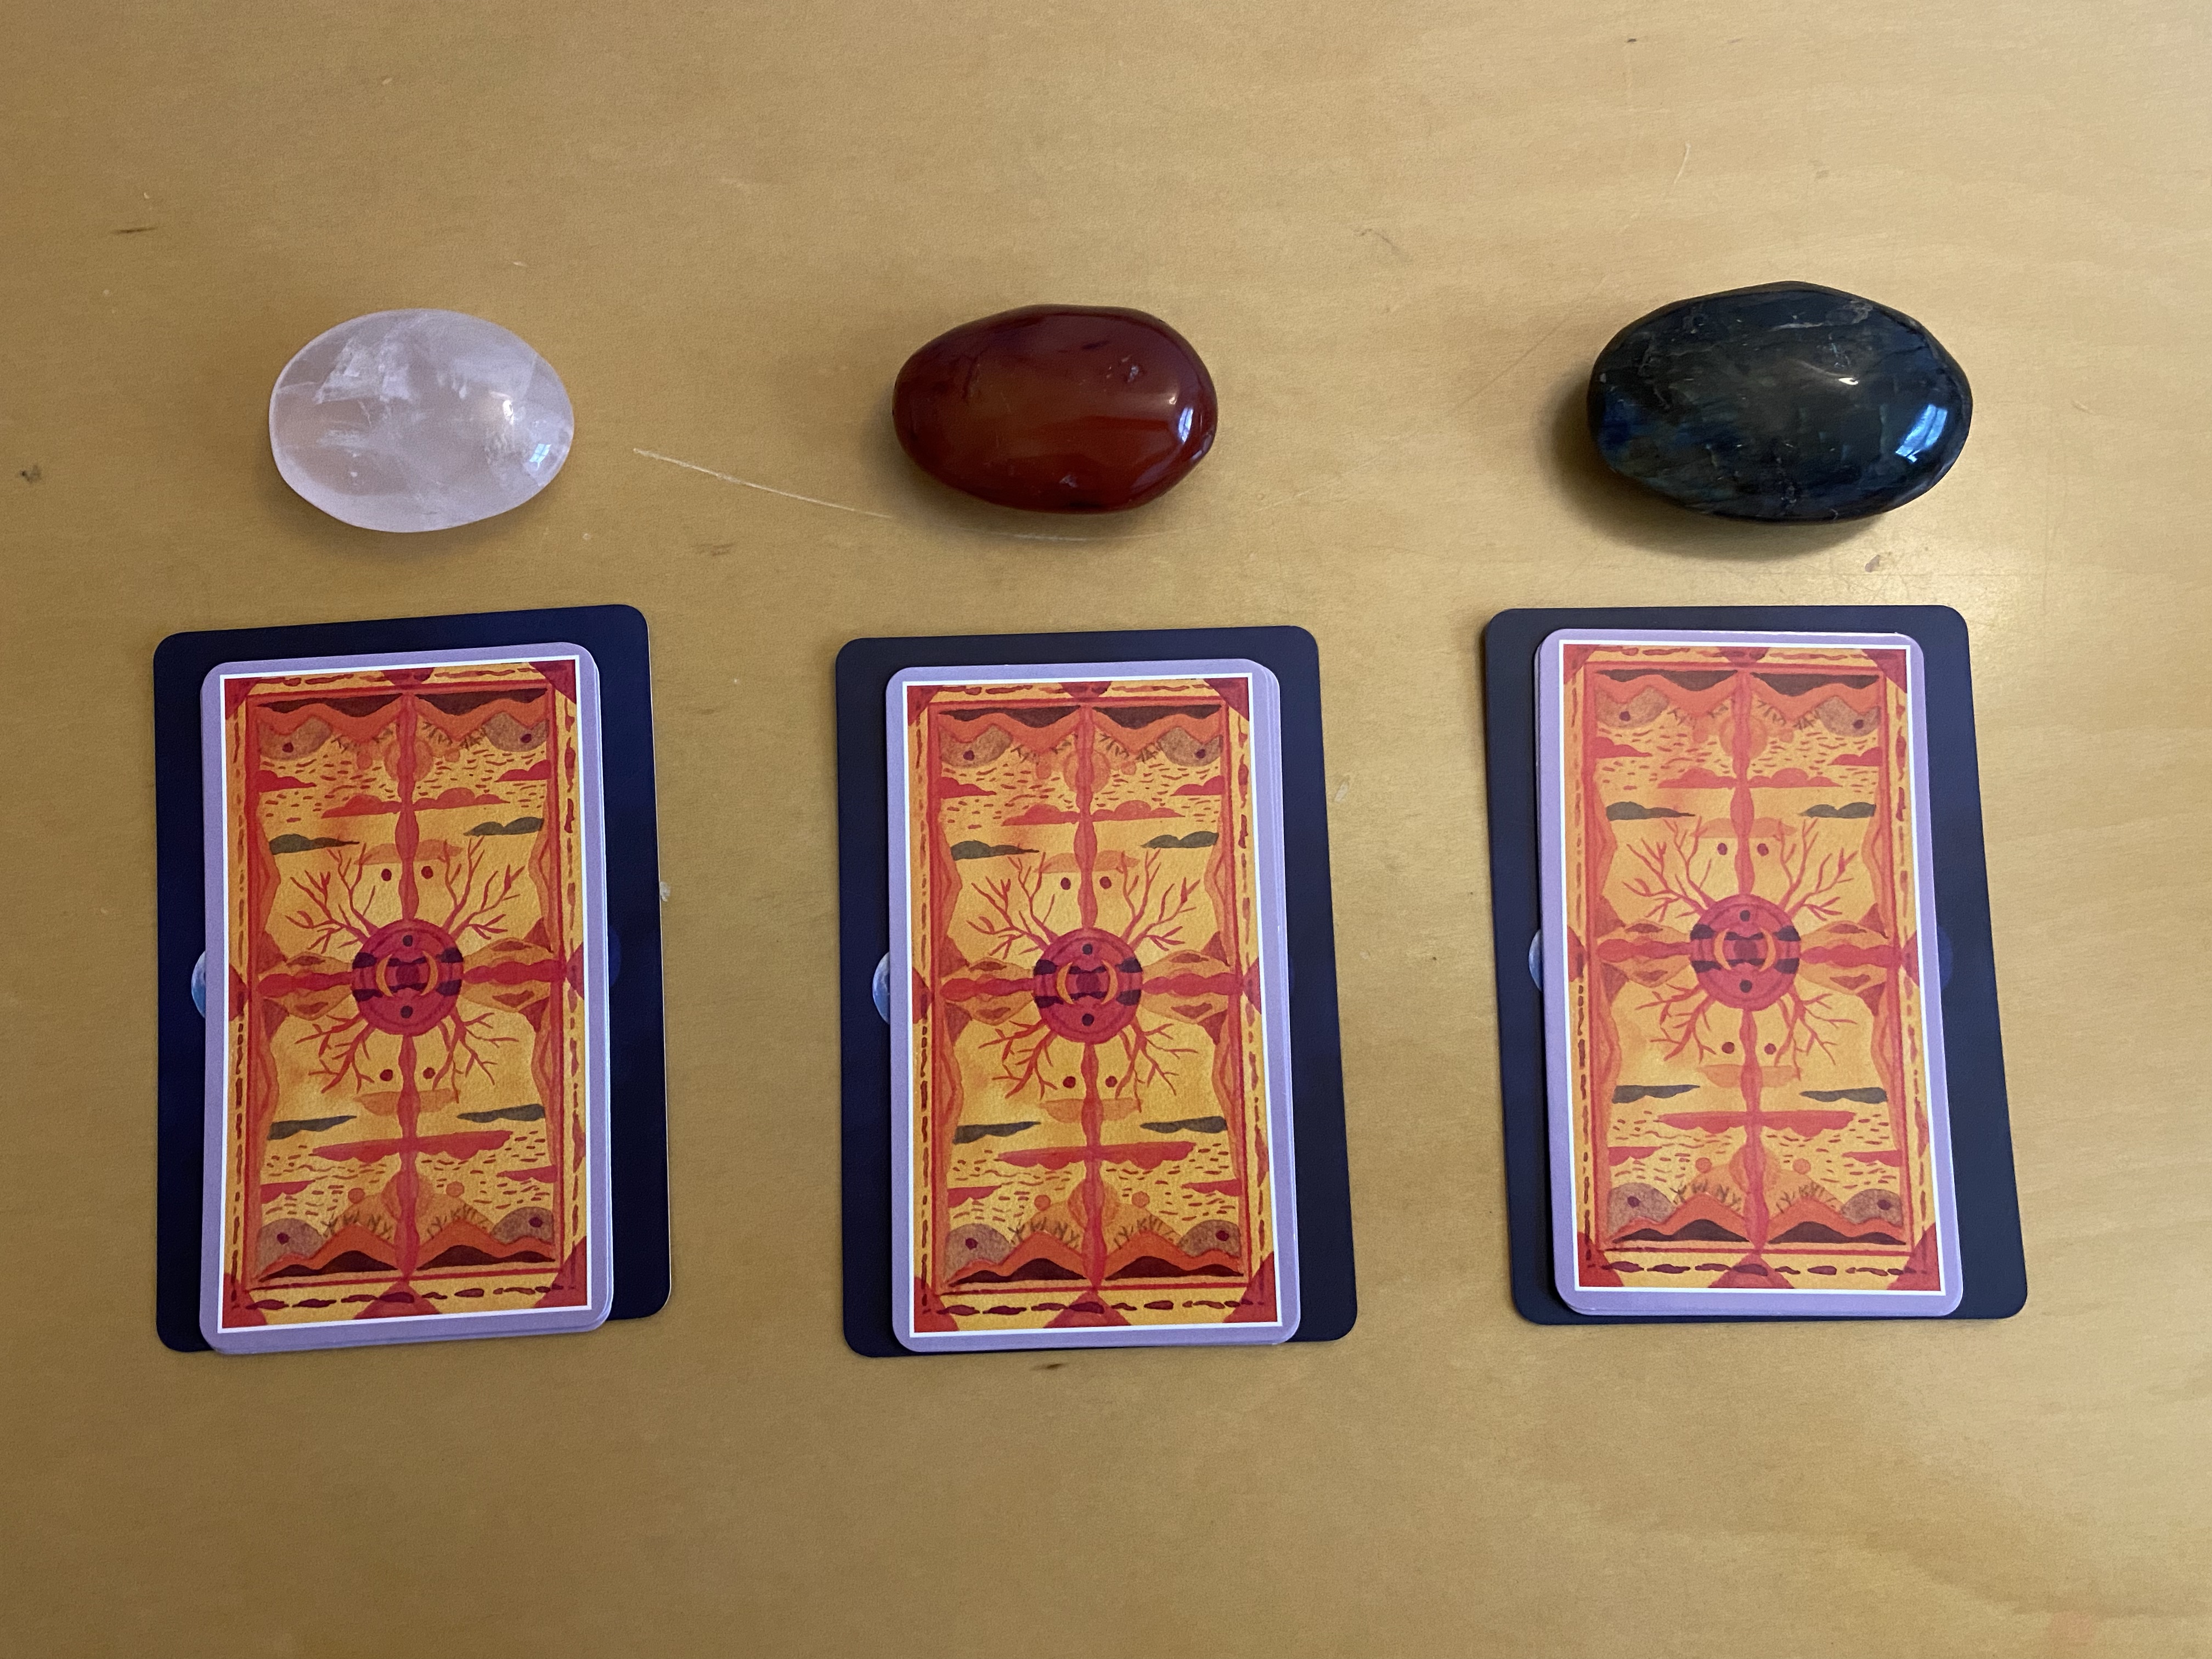 Find a free online tarot reading